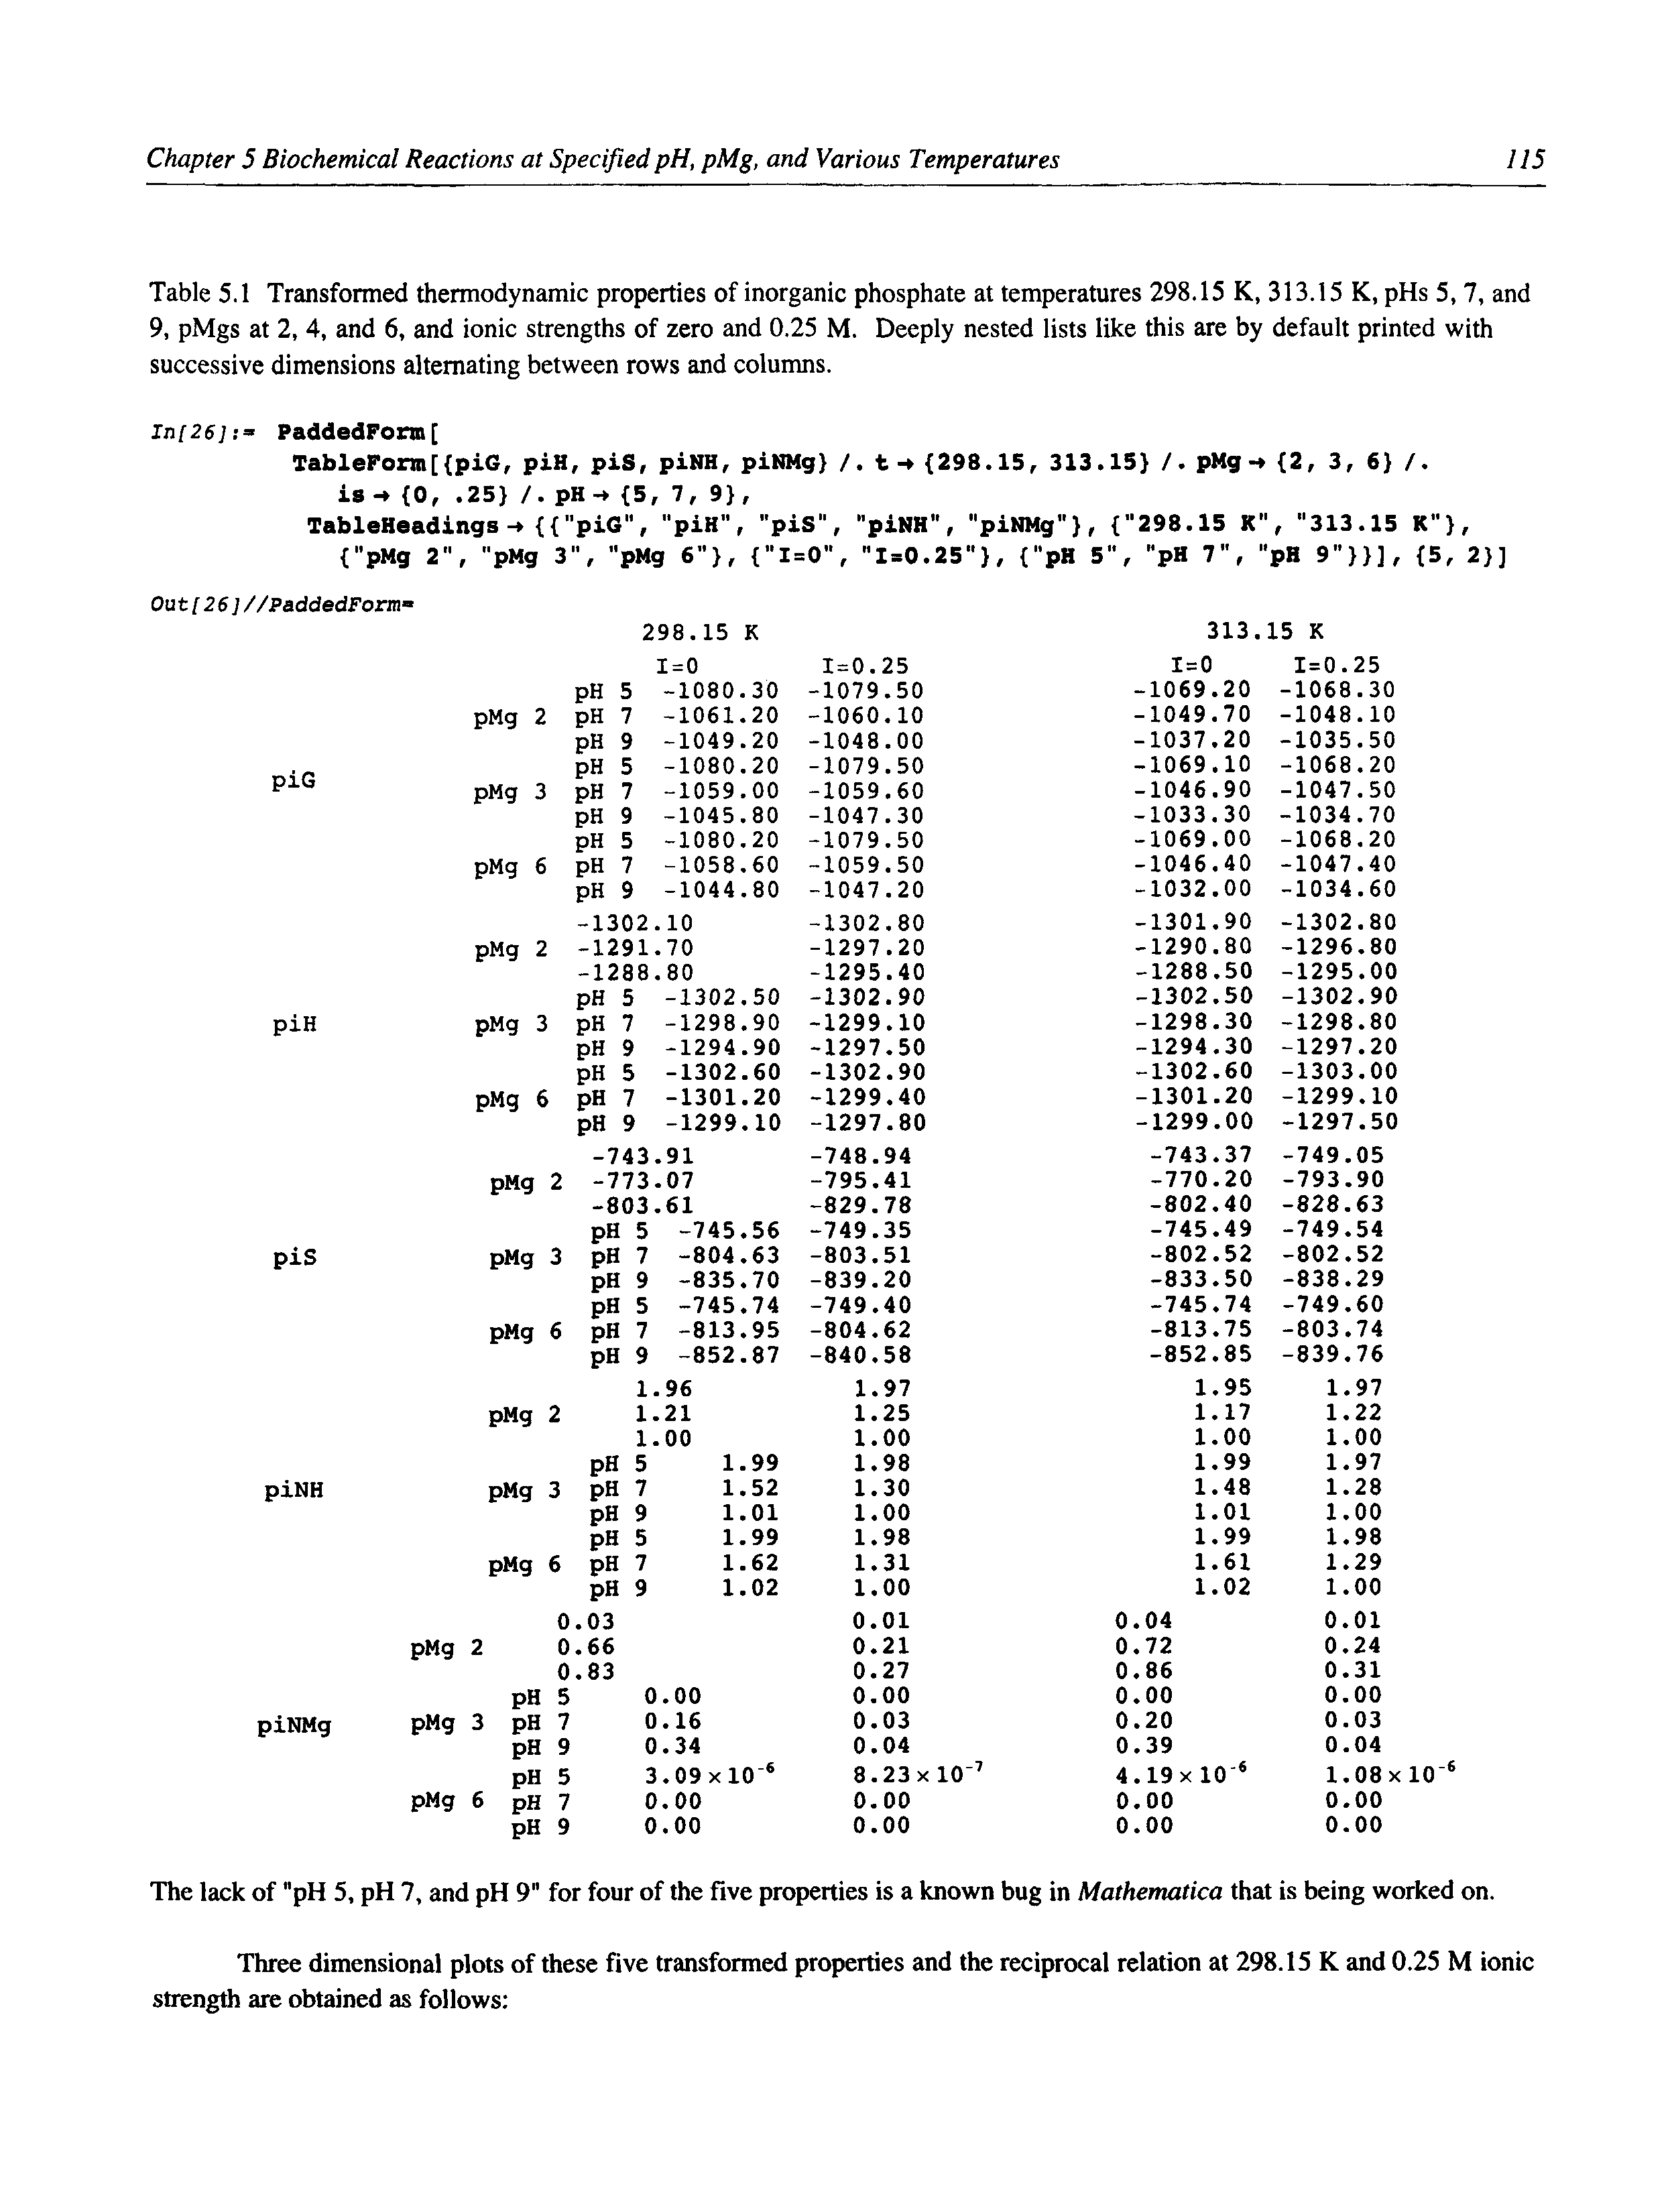 Table 5.1 Transformed thermodynamic properties of inorganic phosphate at temperatures 298.15 K, 313.15 K, pHs 5, 7, and 9, pMgs at 2, 4, and 6, and ionic strengths of zero and 0.25 M. Deeply nested lists like this are by default printed with successive dimensions alternating between rows and columns.